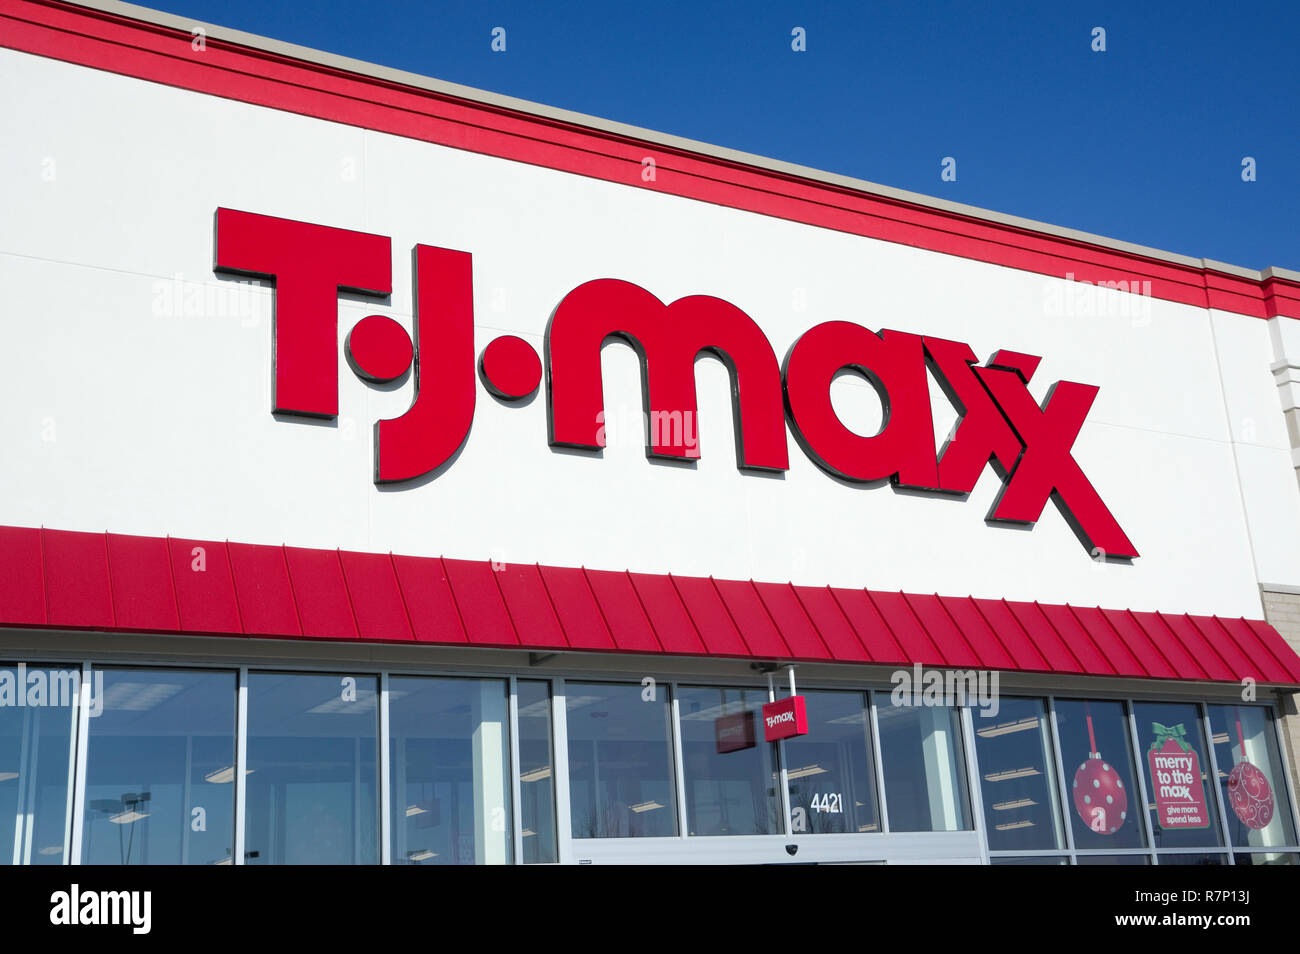 T J Maxx logo sign on store front Stock Photo - Alamy